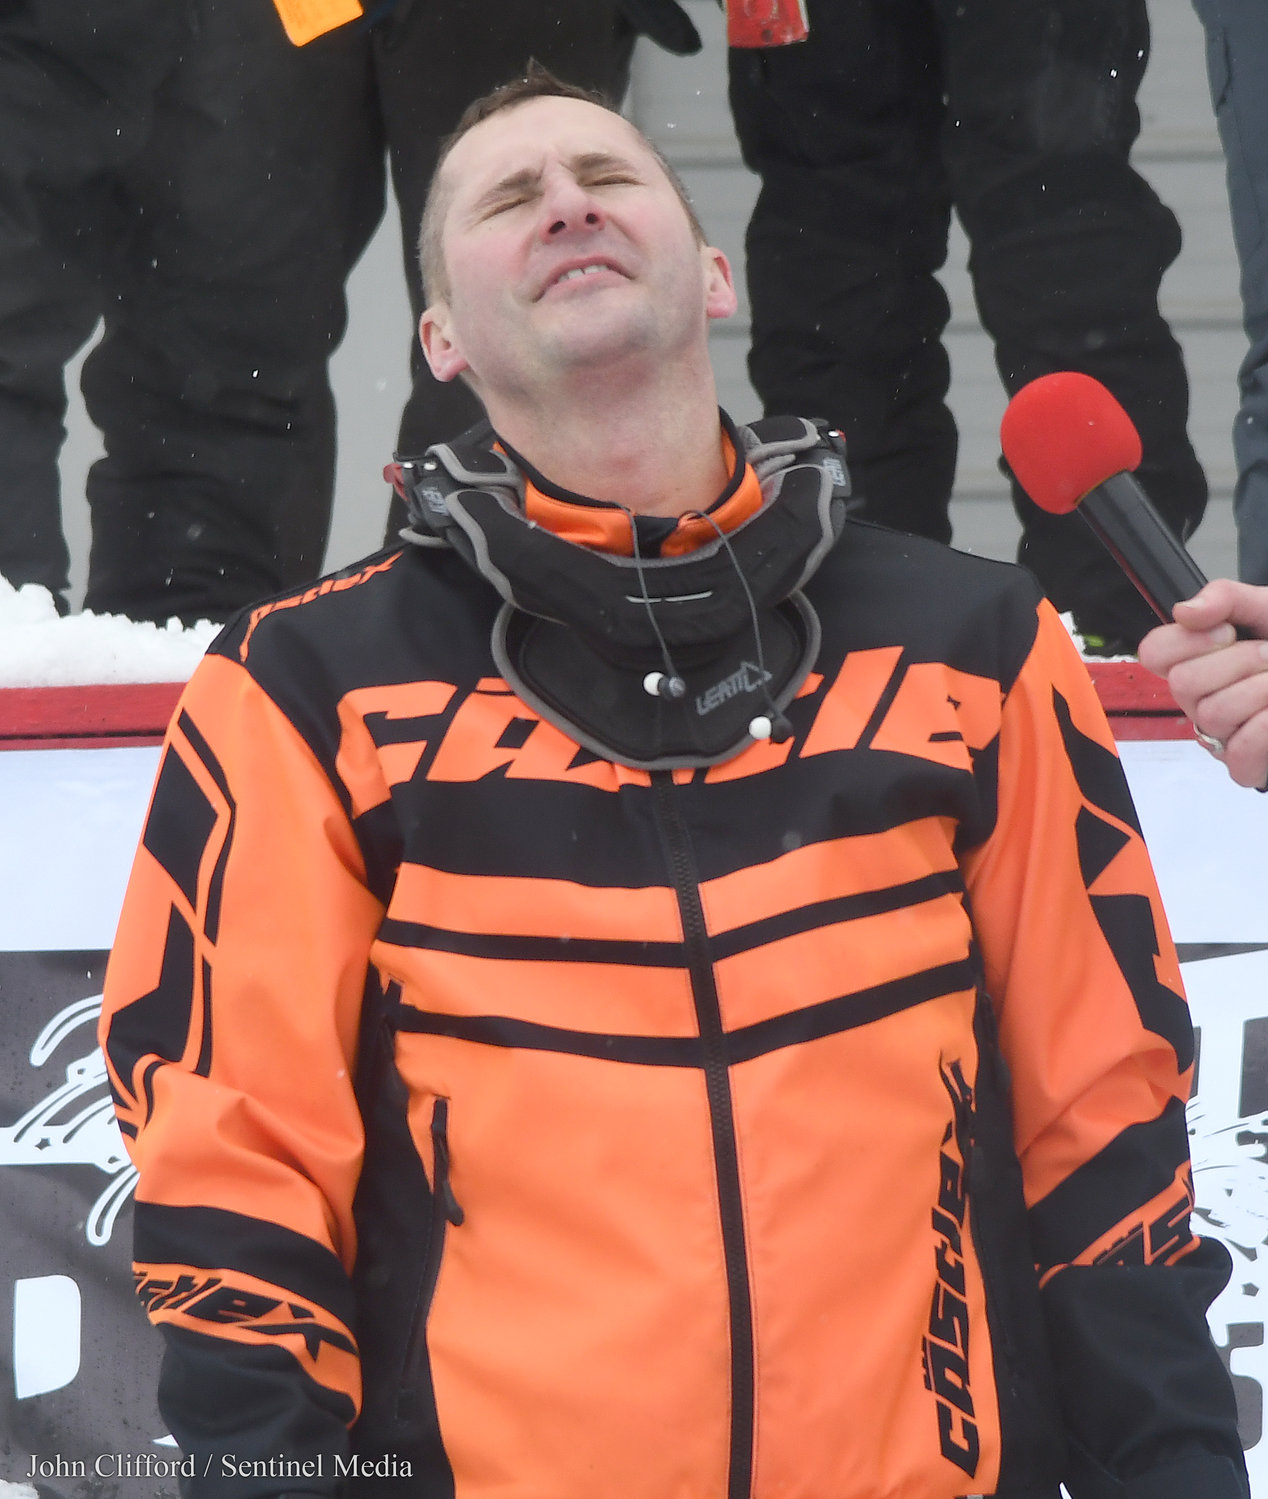 Dream come true- Emotional Jamie Bourgeois from Boonville is the 2023 Pro Champ Adirondack Cup winner in victory lane Sunday, January 29. Bourgeois said he has been trying to win this race since it came back in 2006 or 2007 to for the last 15 years. He credited a new sled and motor package and people helping him out for his win. Bourgeois races all over Canada and has been out to Wisconsin to race but this is the "one I've been after my hometown track" race.